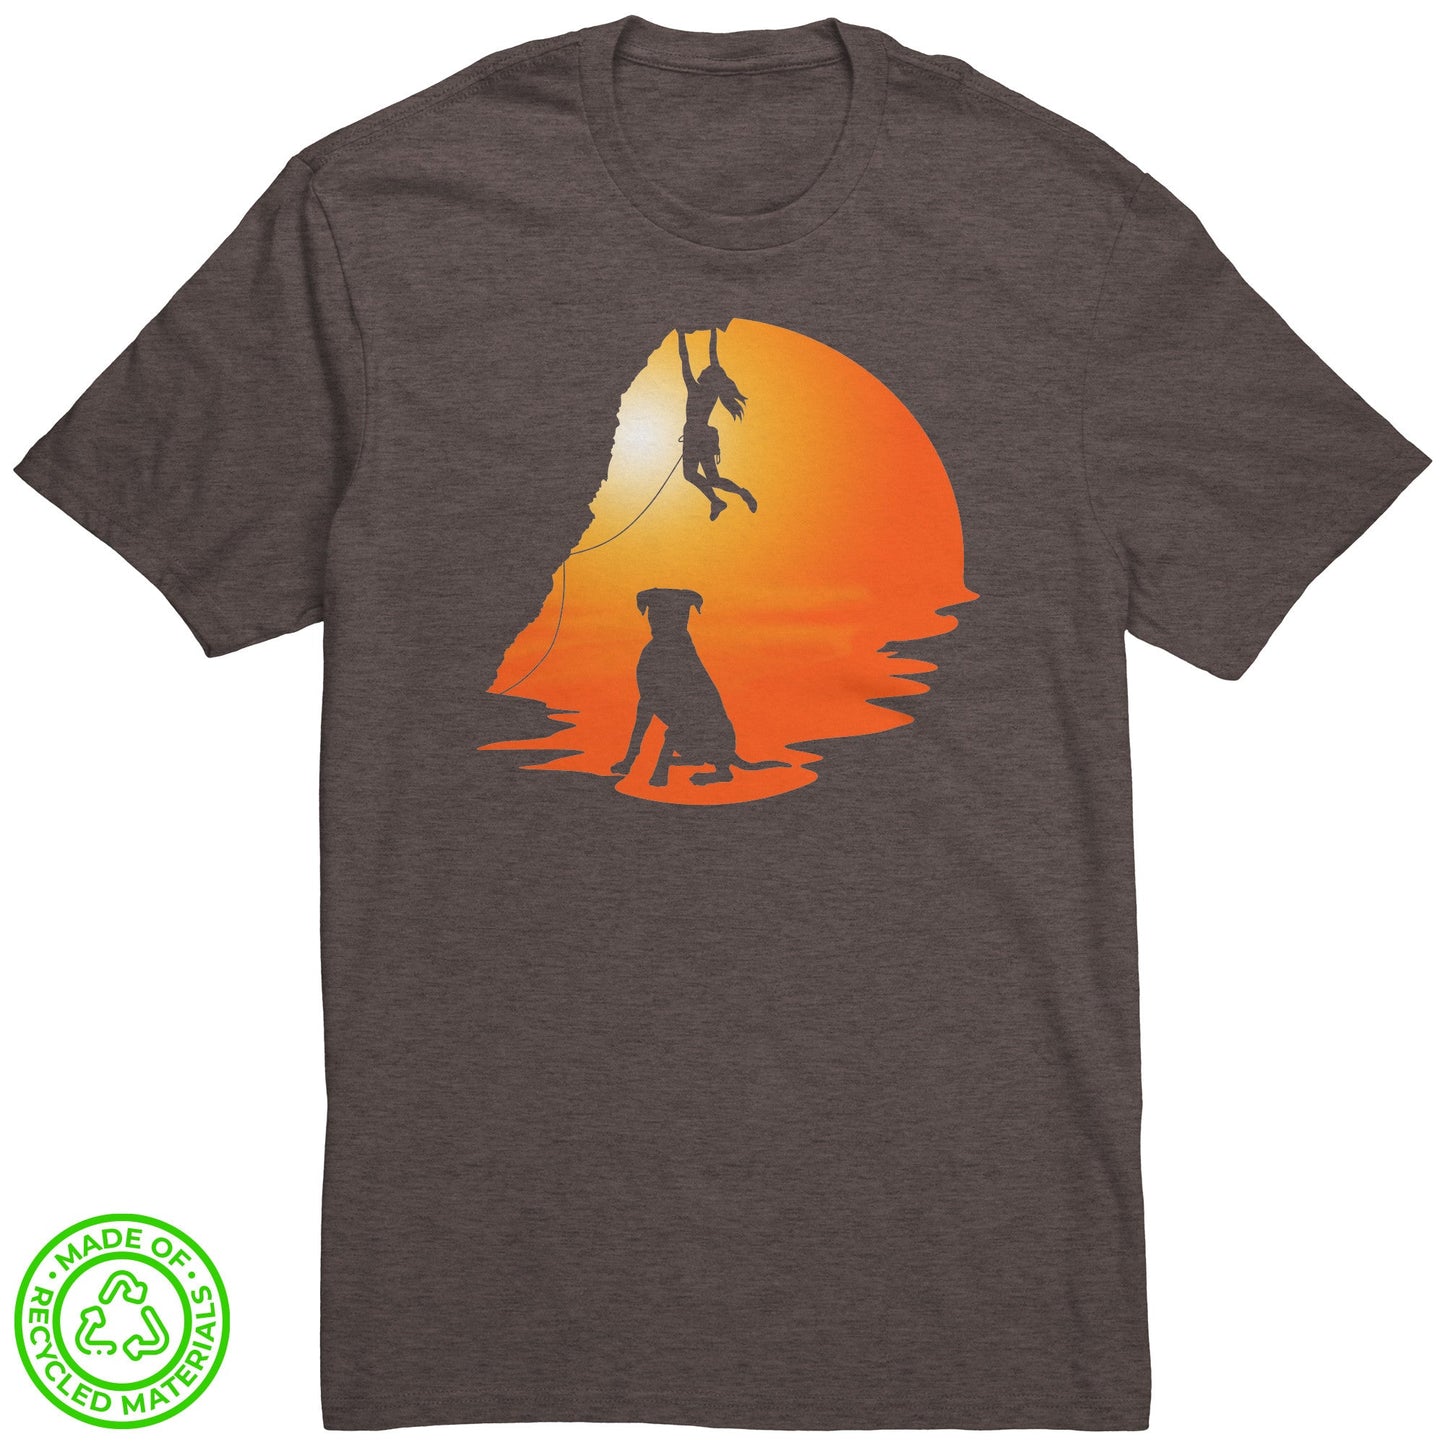 Eco-friendly Re-Tee (Climber and Dog at sunset)